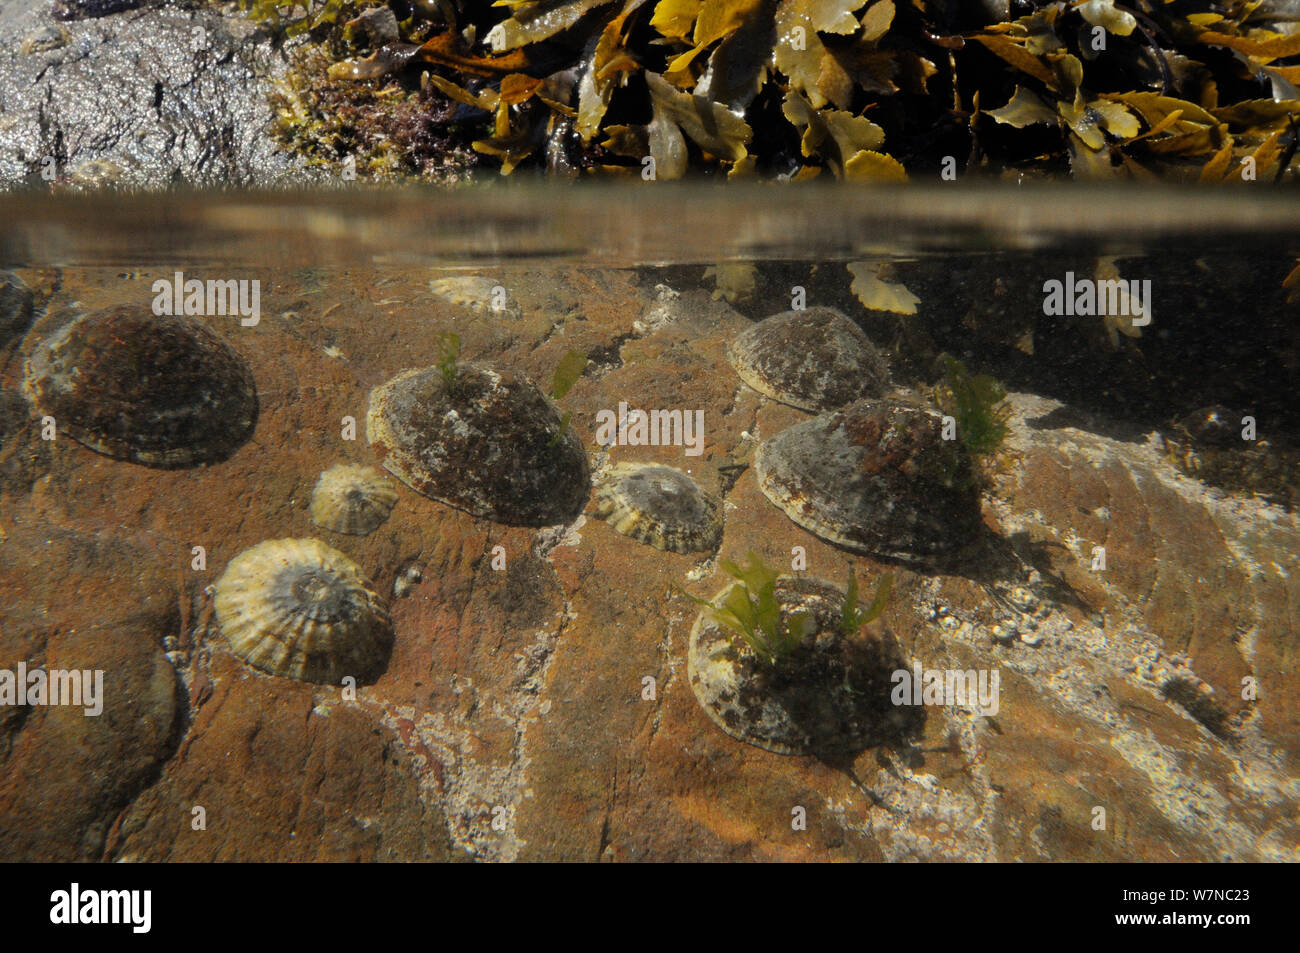 Split level view of a group of Common limpets (Patella vulgata) on the move on intertidal rocks about to be exposed by a falling tide, alongside a clump of Toothed wrack (Fucus serratus), near Falmouth, Cornwall, UK, August. Stock Photo